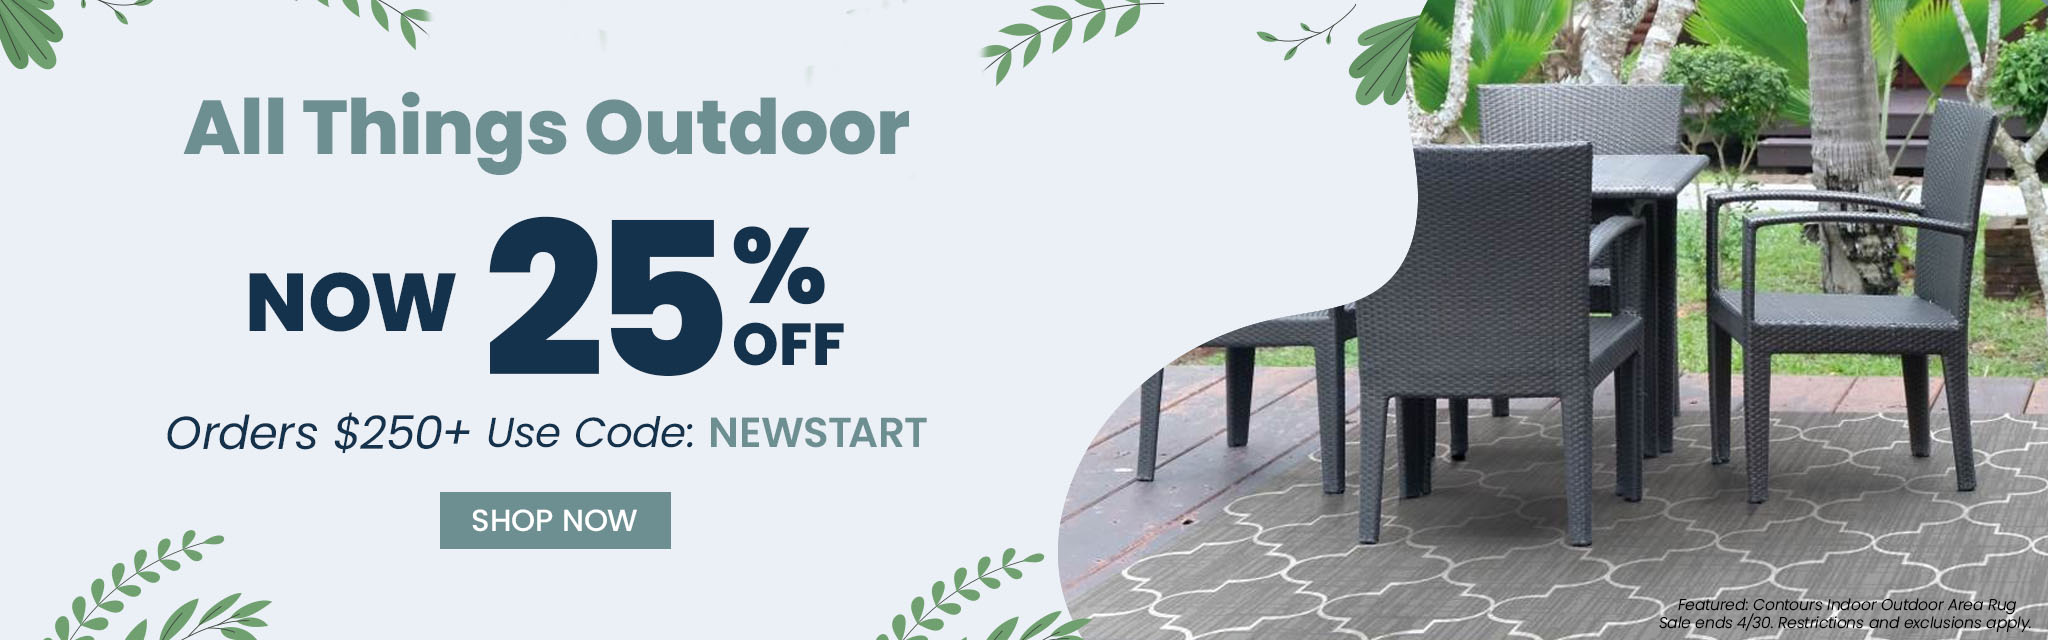 All Things Outdoor, Now 25% Off | Orders $250+ Use Code: NEWSTART | CTA: Shop Now *Ends 4/30. Restrictions and exclusions apply. 